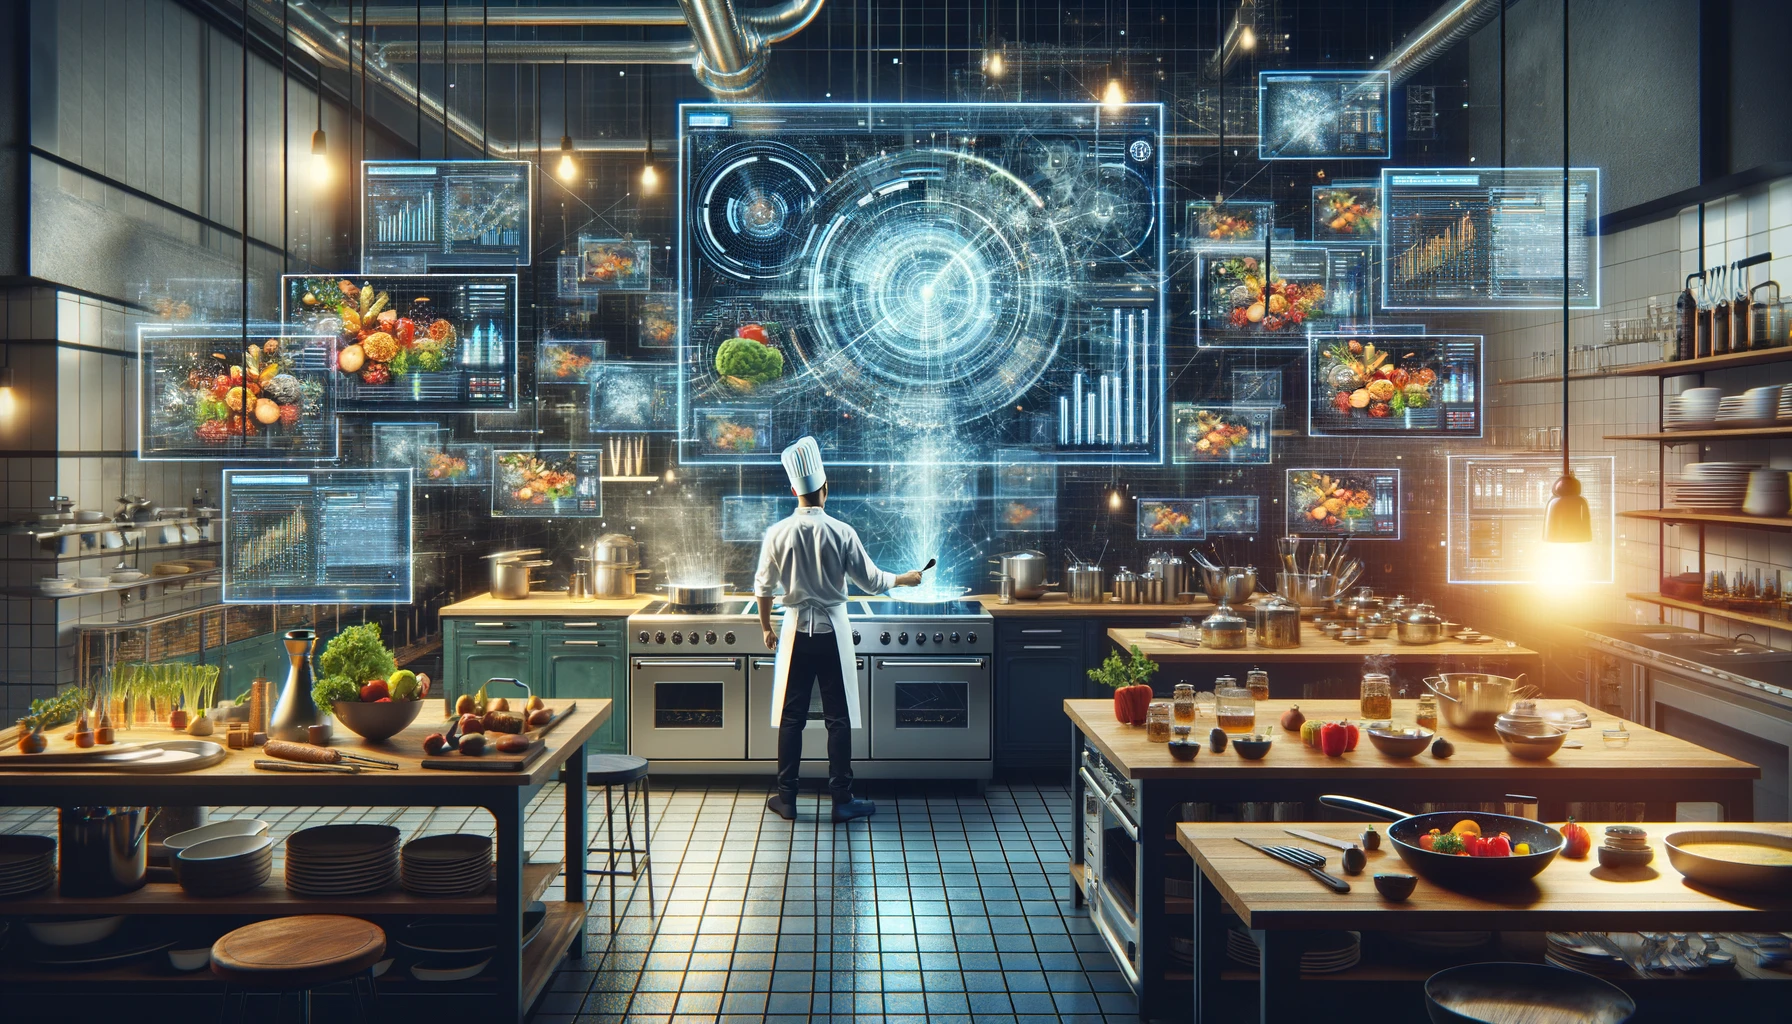 Create another variation of the kitchen scene, focusing on intensifying the presence of digital technology. This time, incorporate an even larger number of digital screens showcasing complex data analytics, graphs, and real-time cooking data. The kitchen should be the epitome of a smart kitchen, with every appliance connected and data-driven, reflecting cutting-edge culinary technology. The chef, amidst this network of technology, remains the focal point, demonstrating mastery over both the culinary arts and the digital realm. The scene should be bustling with activity, yet maintain a sense of order and precision, showcasing the ultimate blend of high technology and gourmet cooking in a professional setting. Maintain the widescreen aspect ratio to capture the full breadth of the tech-savvy kitchen environment.